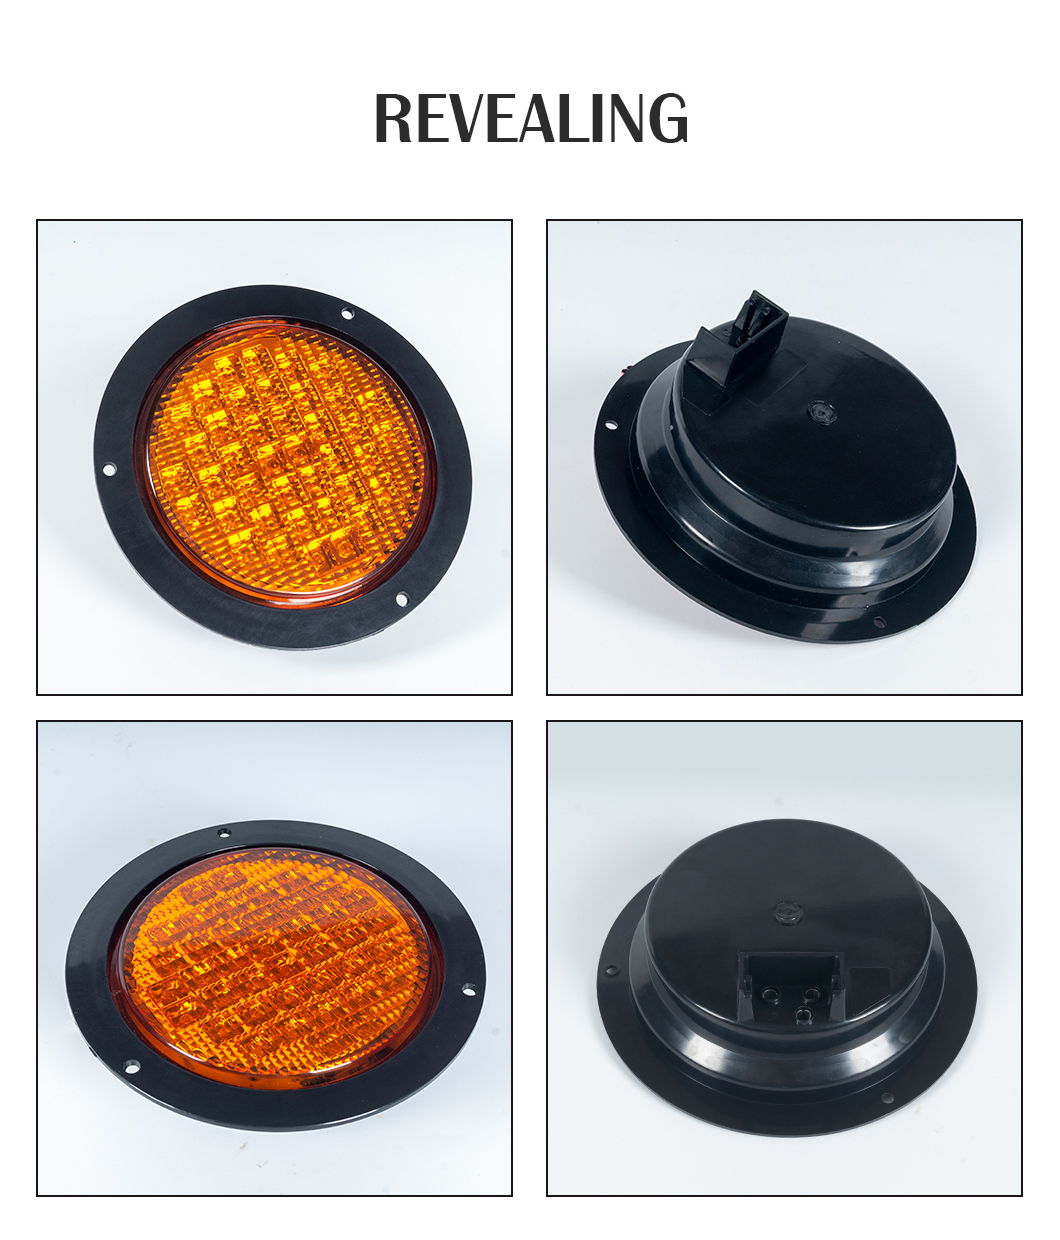 Briefly talk about LED tail light